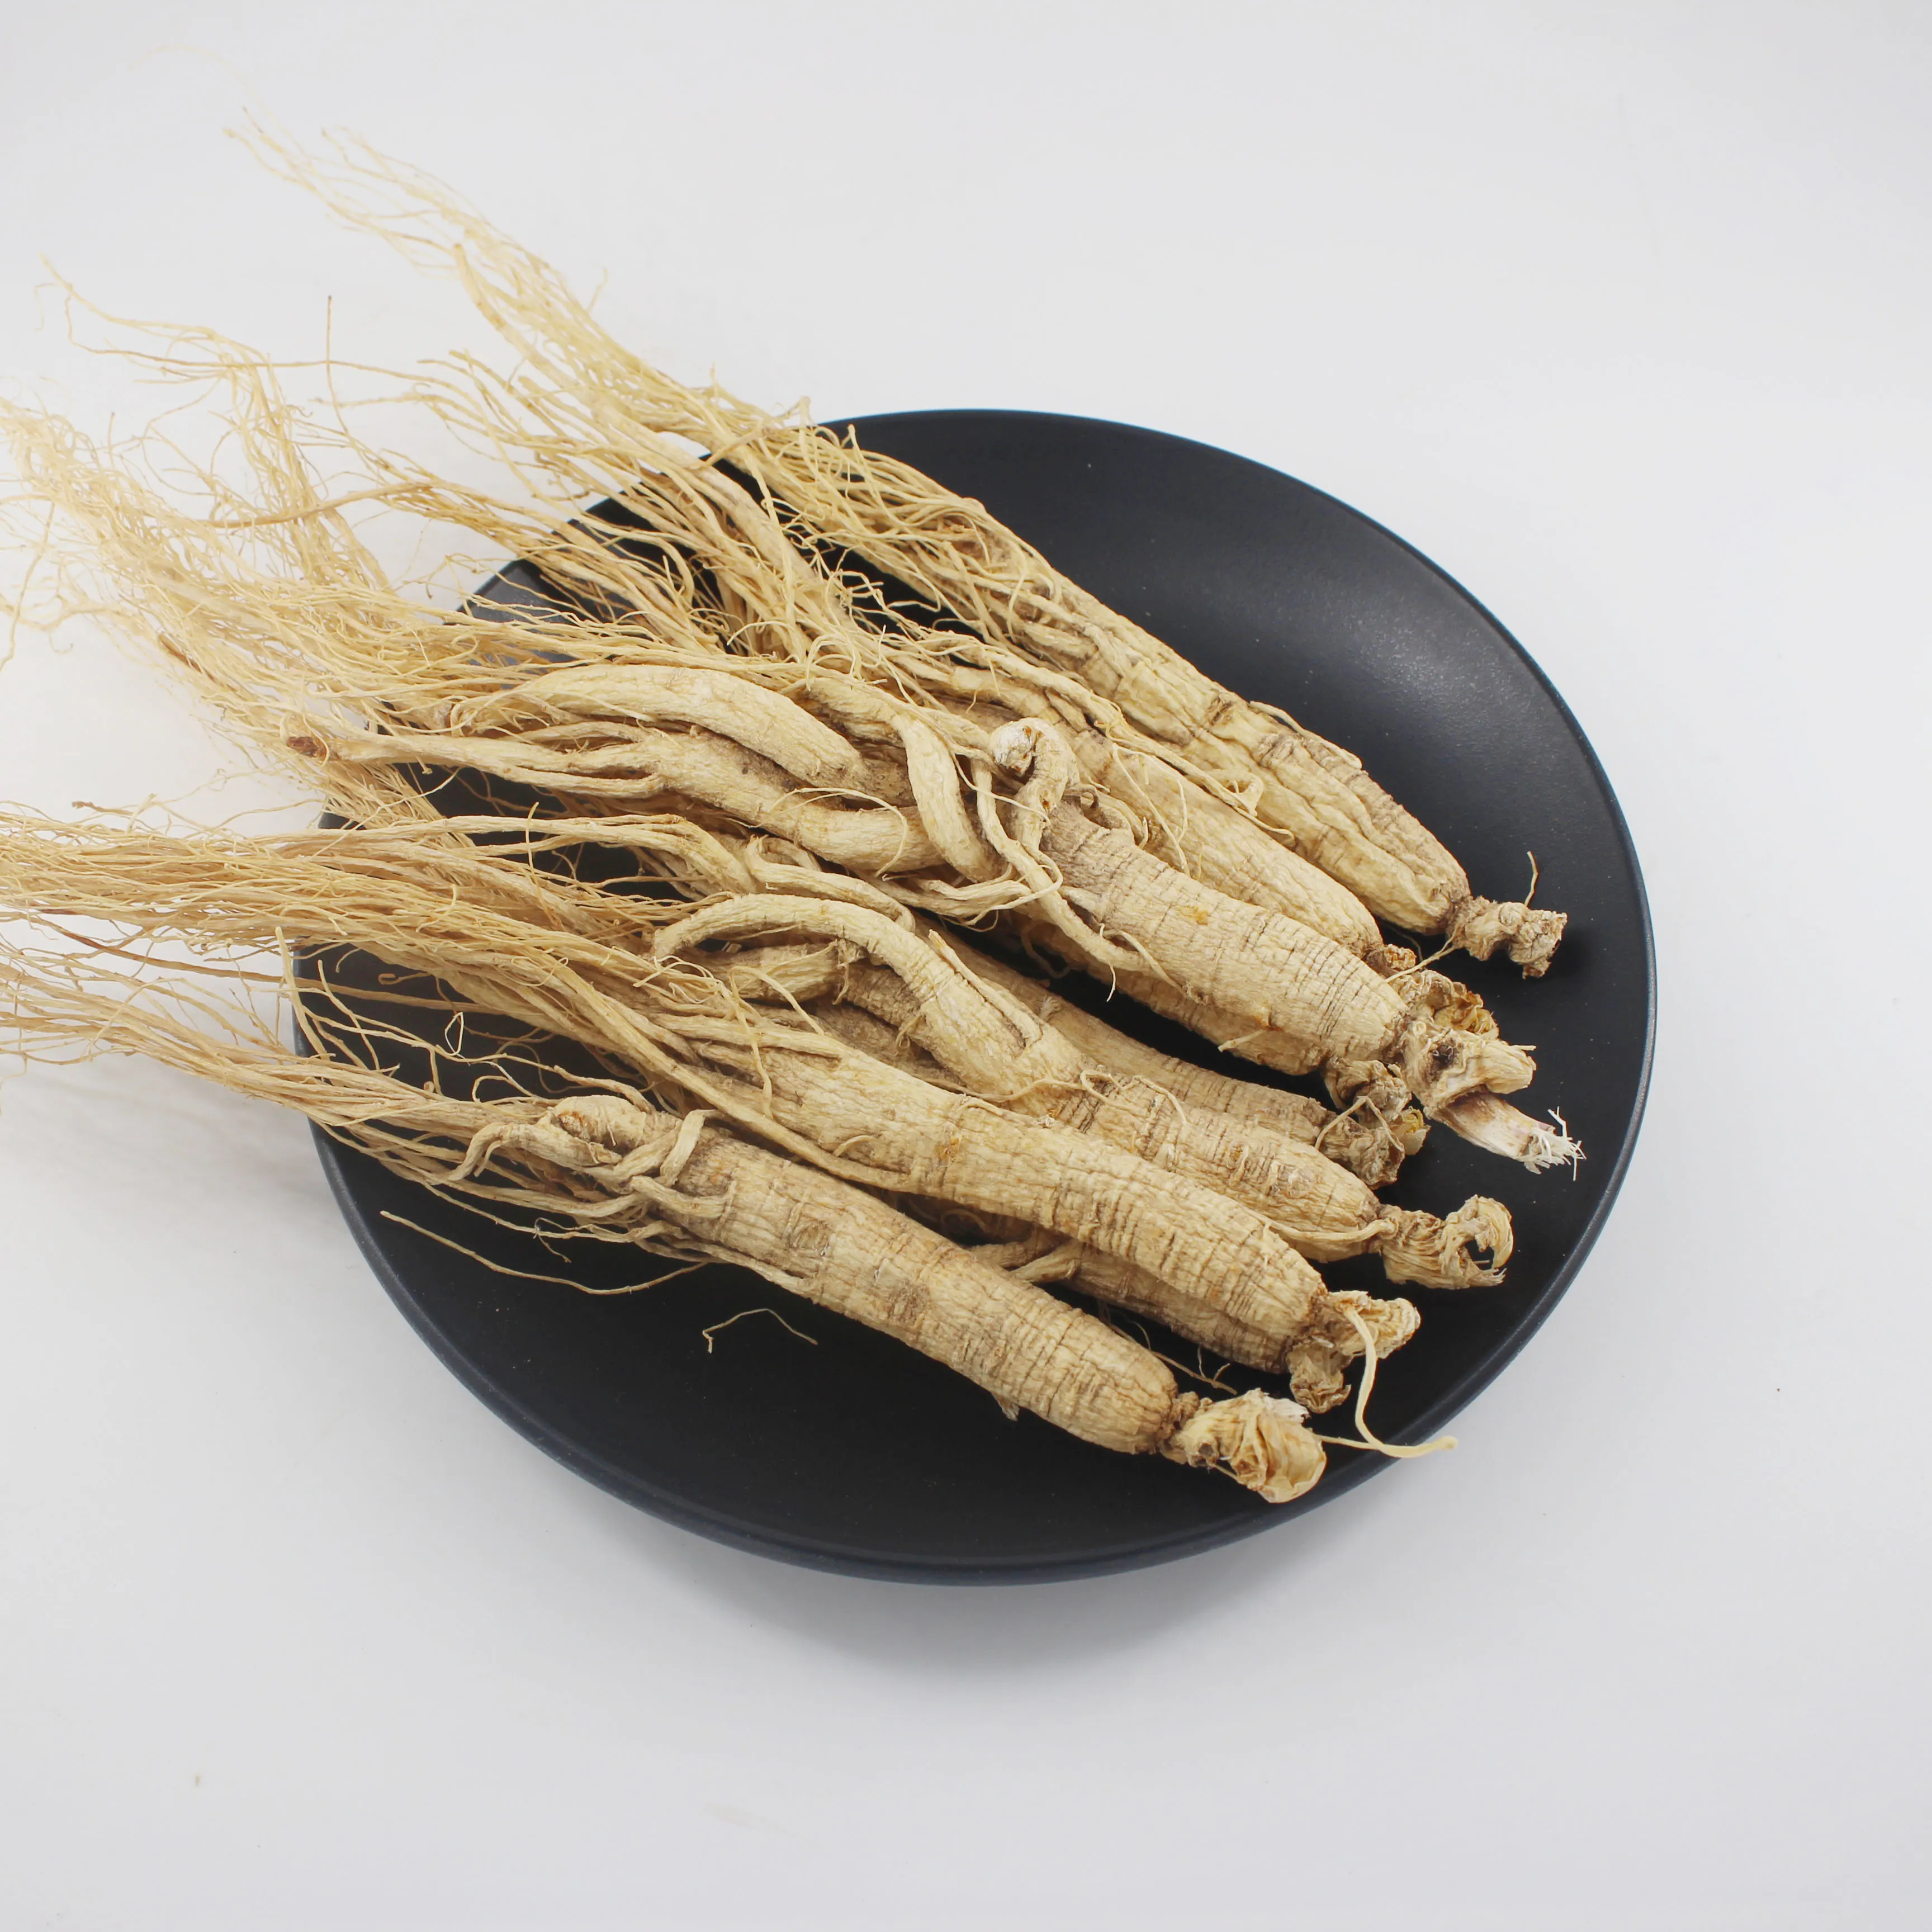 Wholesale Prices High Quality Nutritious Capsules of Ginseng /Ginseng extraction/Panax ginseng